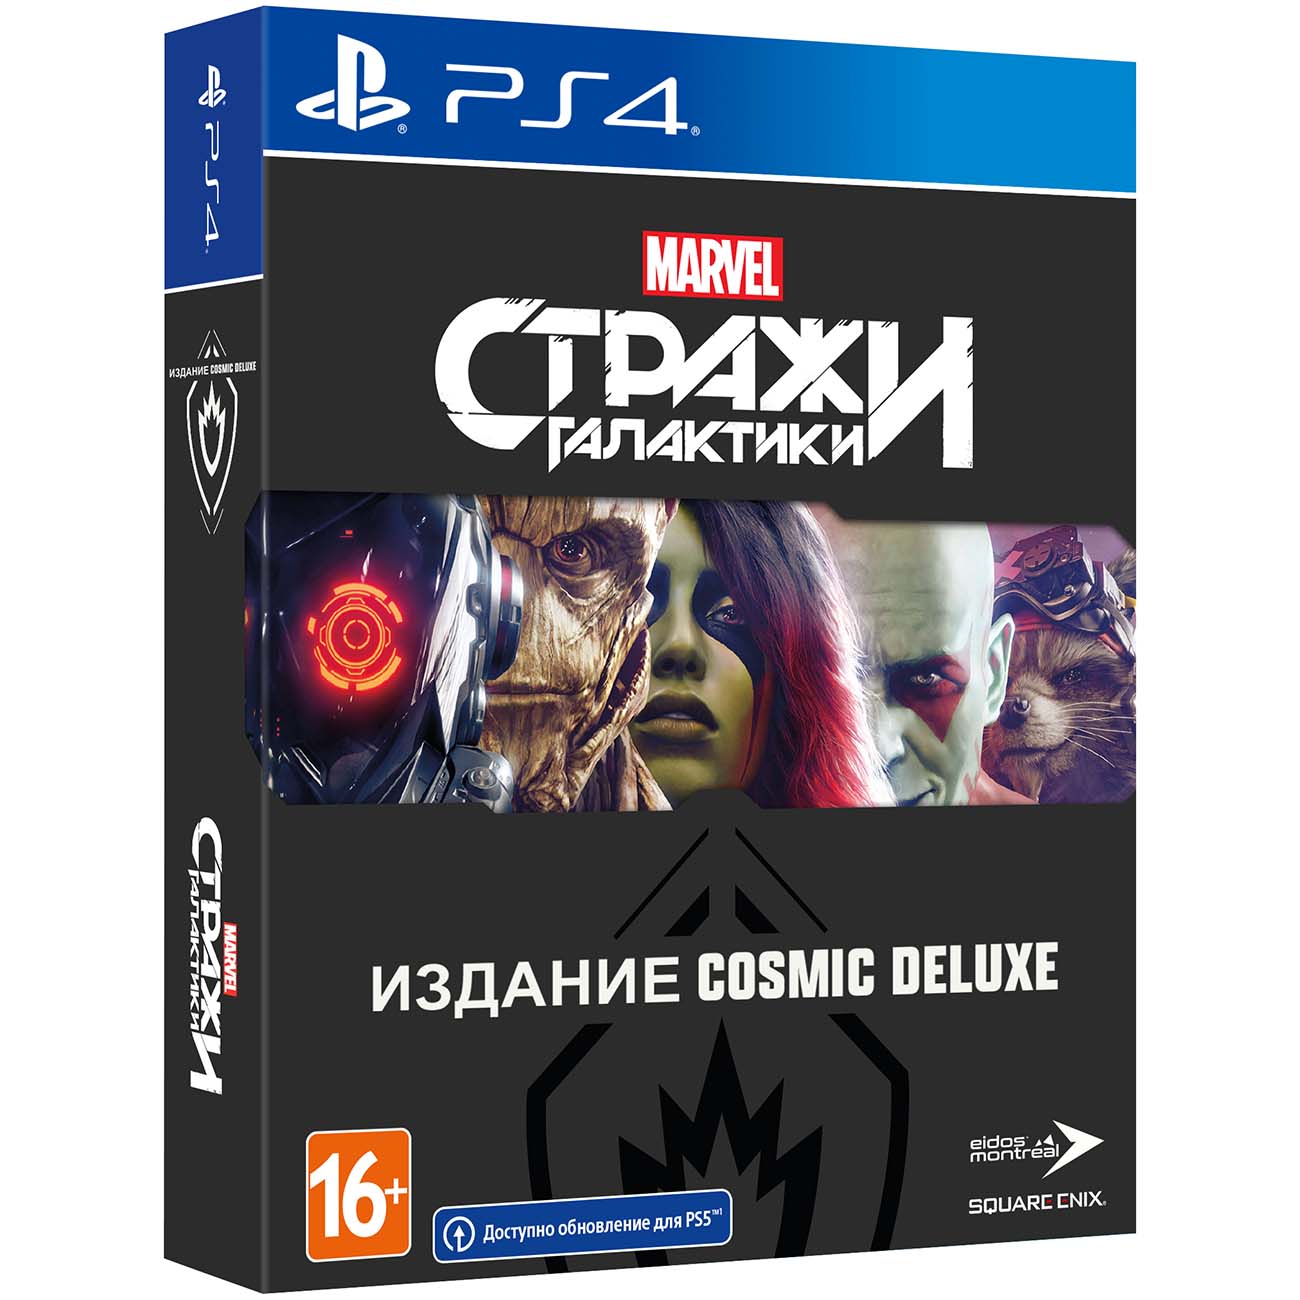 Marvel's Guardians of the Galaxy - Cosmic Deluxe Edition [PS4, русская версия]